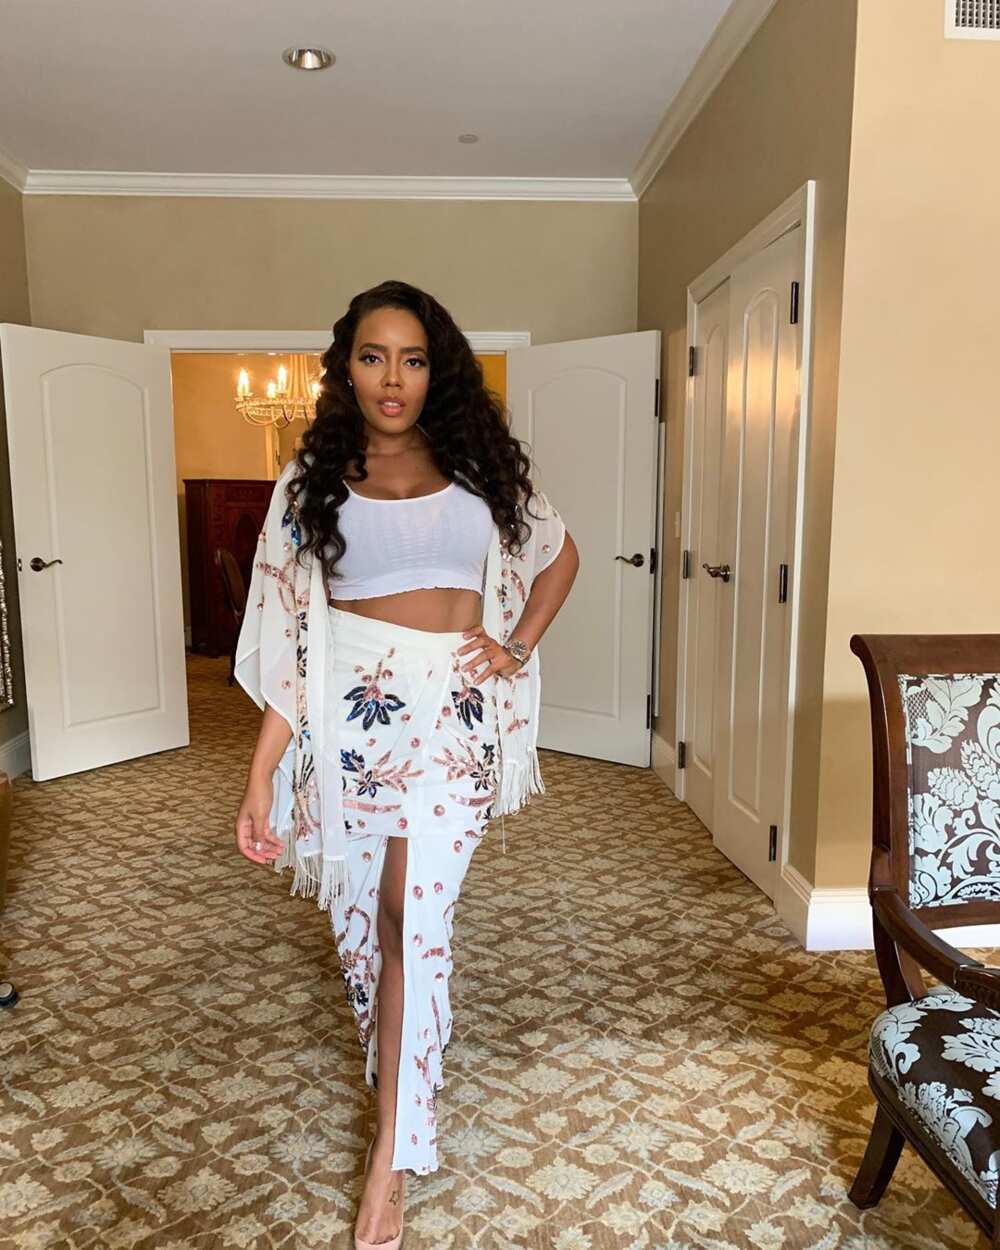 How old is Angela Simmons